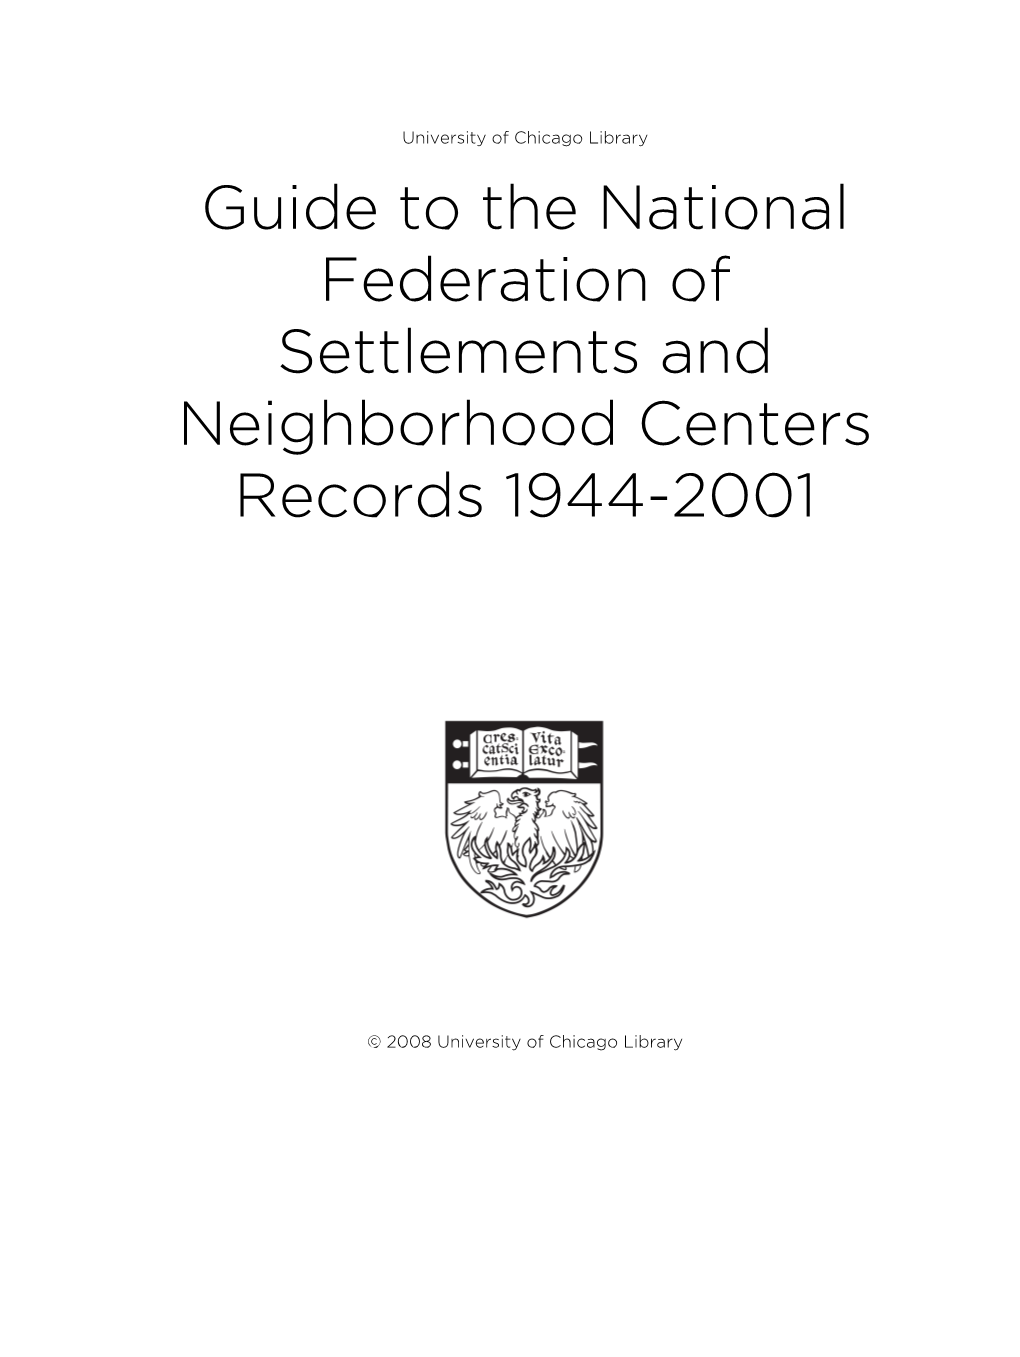 Guide to the National Federation of Settlements and Neighborhood Centers Records 1944-2001